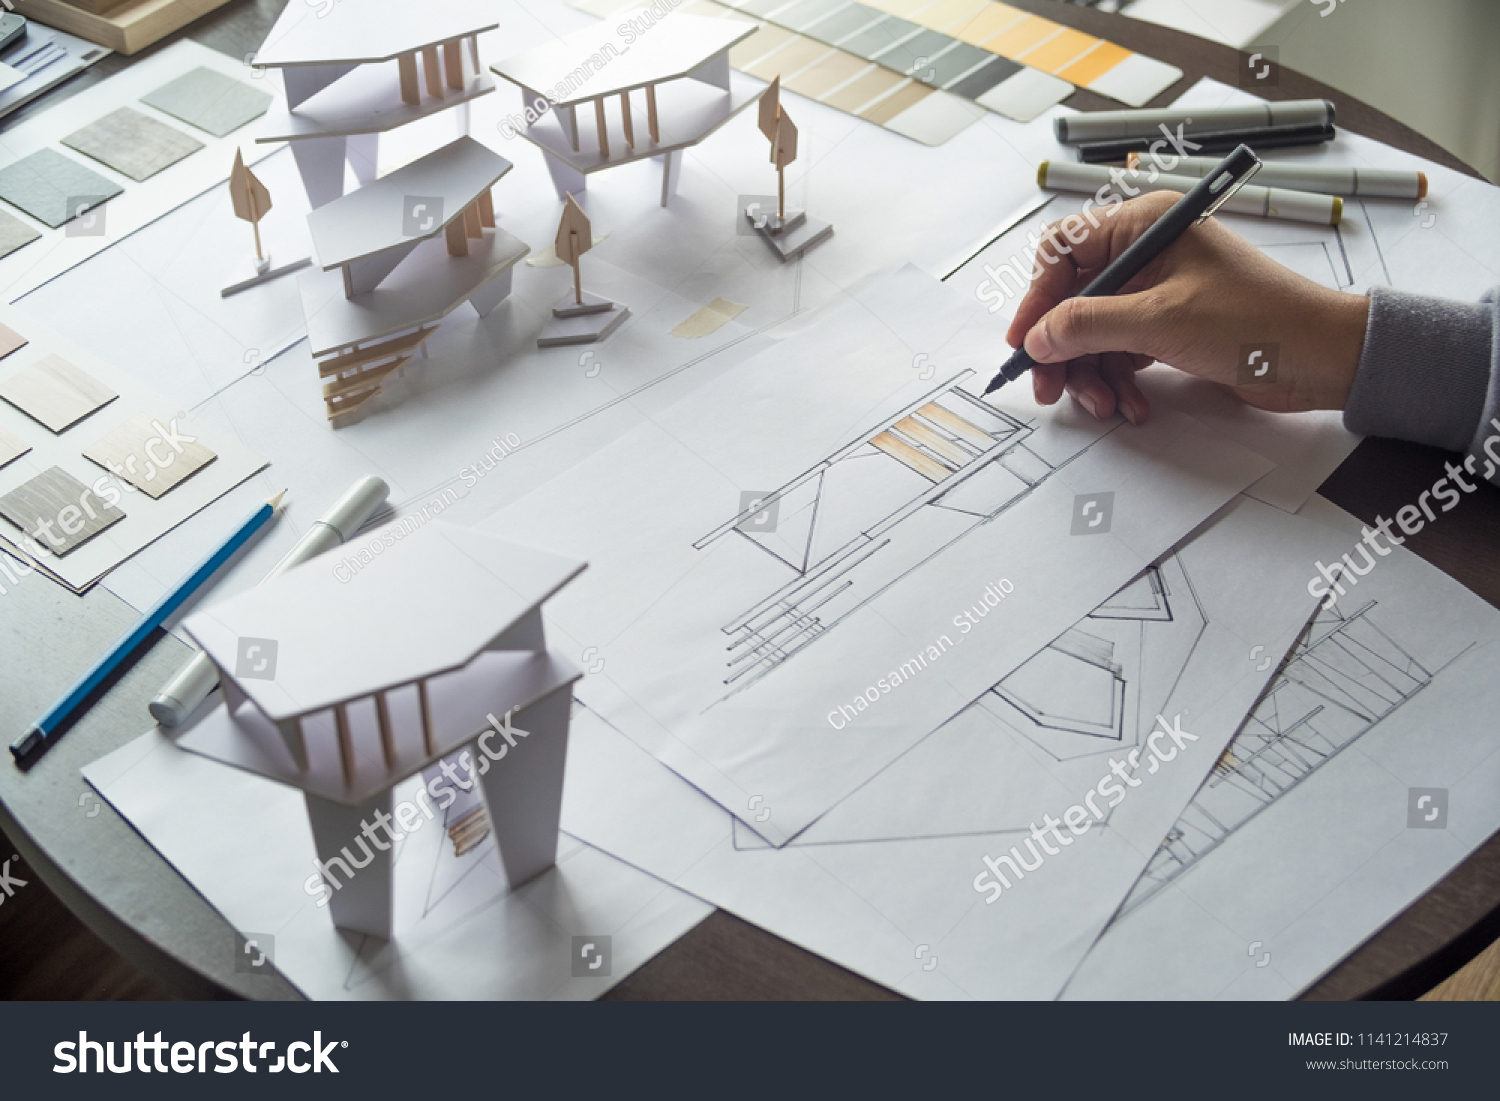 architect design working drawing sketch plans blueprints and making architectural construction model in architect studio #1141214837